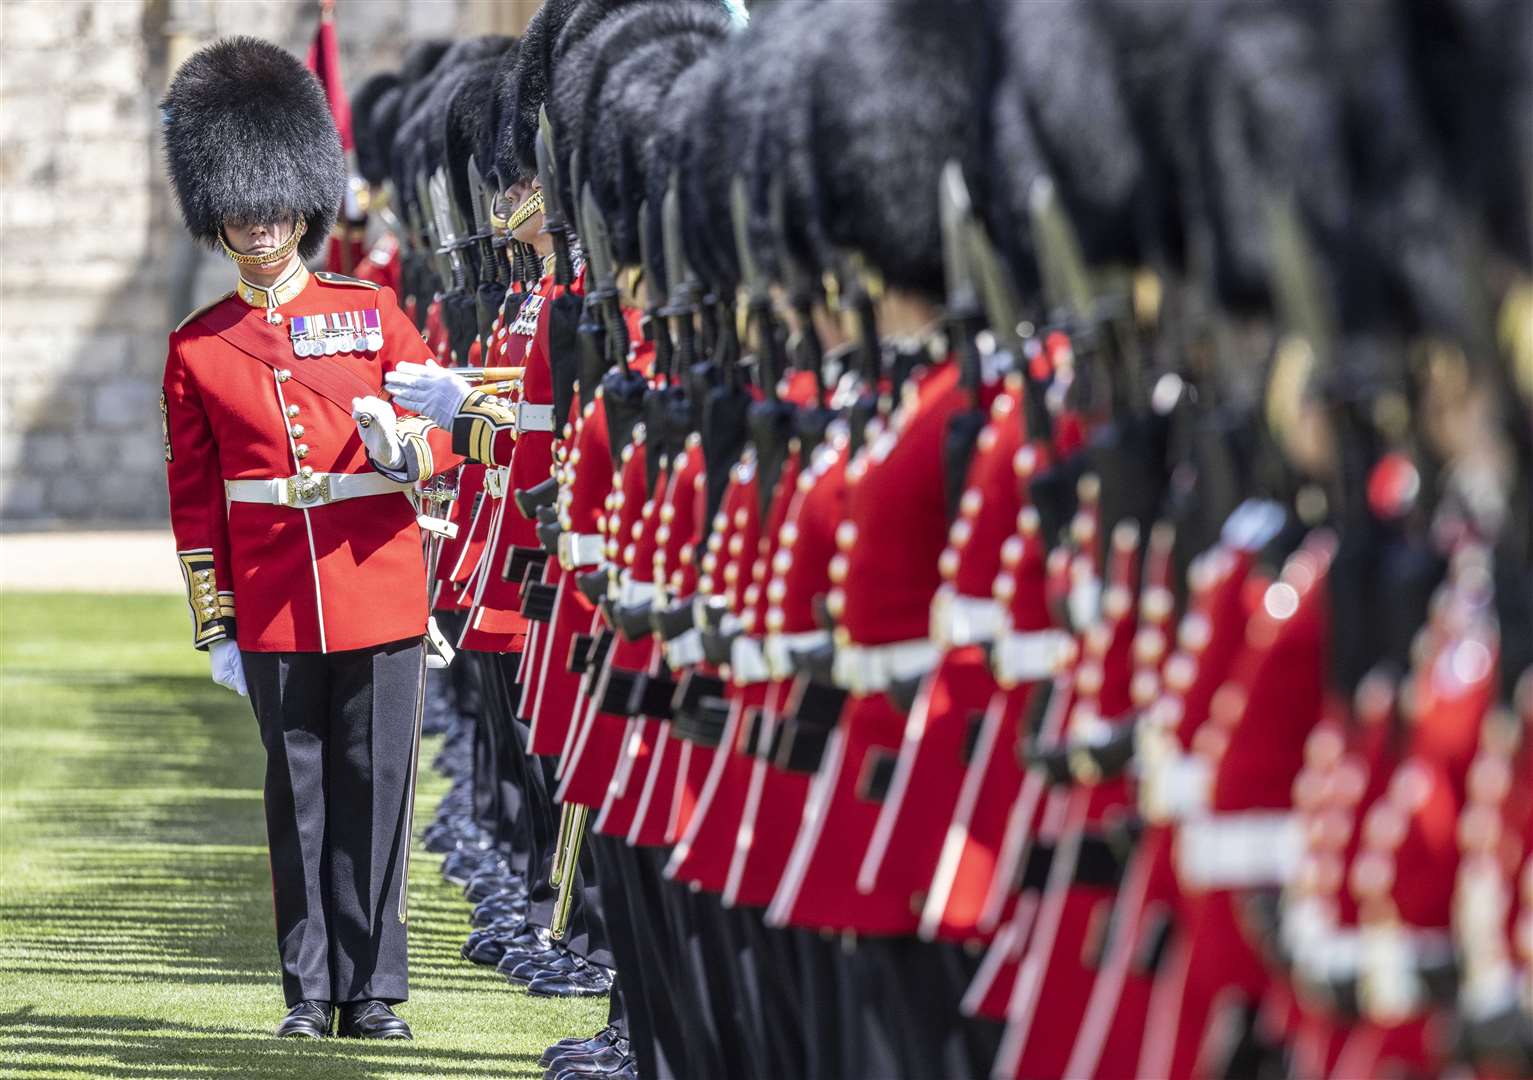 A warrant officer of the 1st Battalion Irish Guards makes sure the line of guardsmen is straight as the regiment lines up on parade in the Quadrangle (Richard Pohle/The Times/PA)